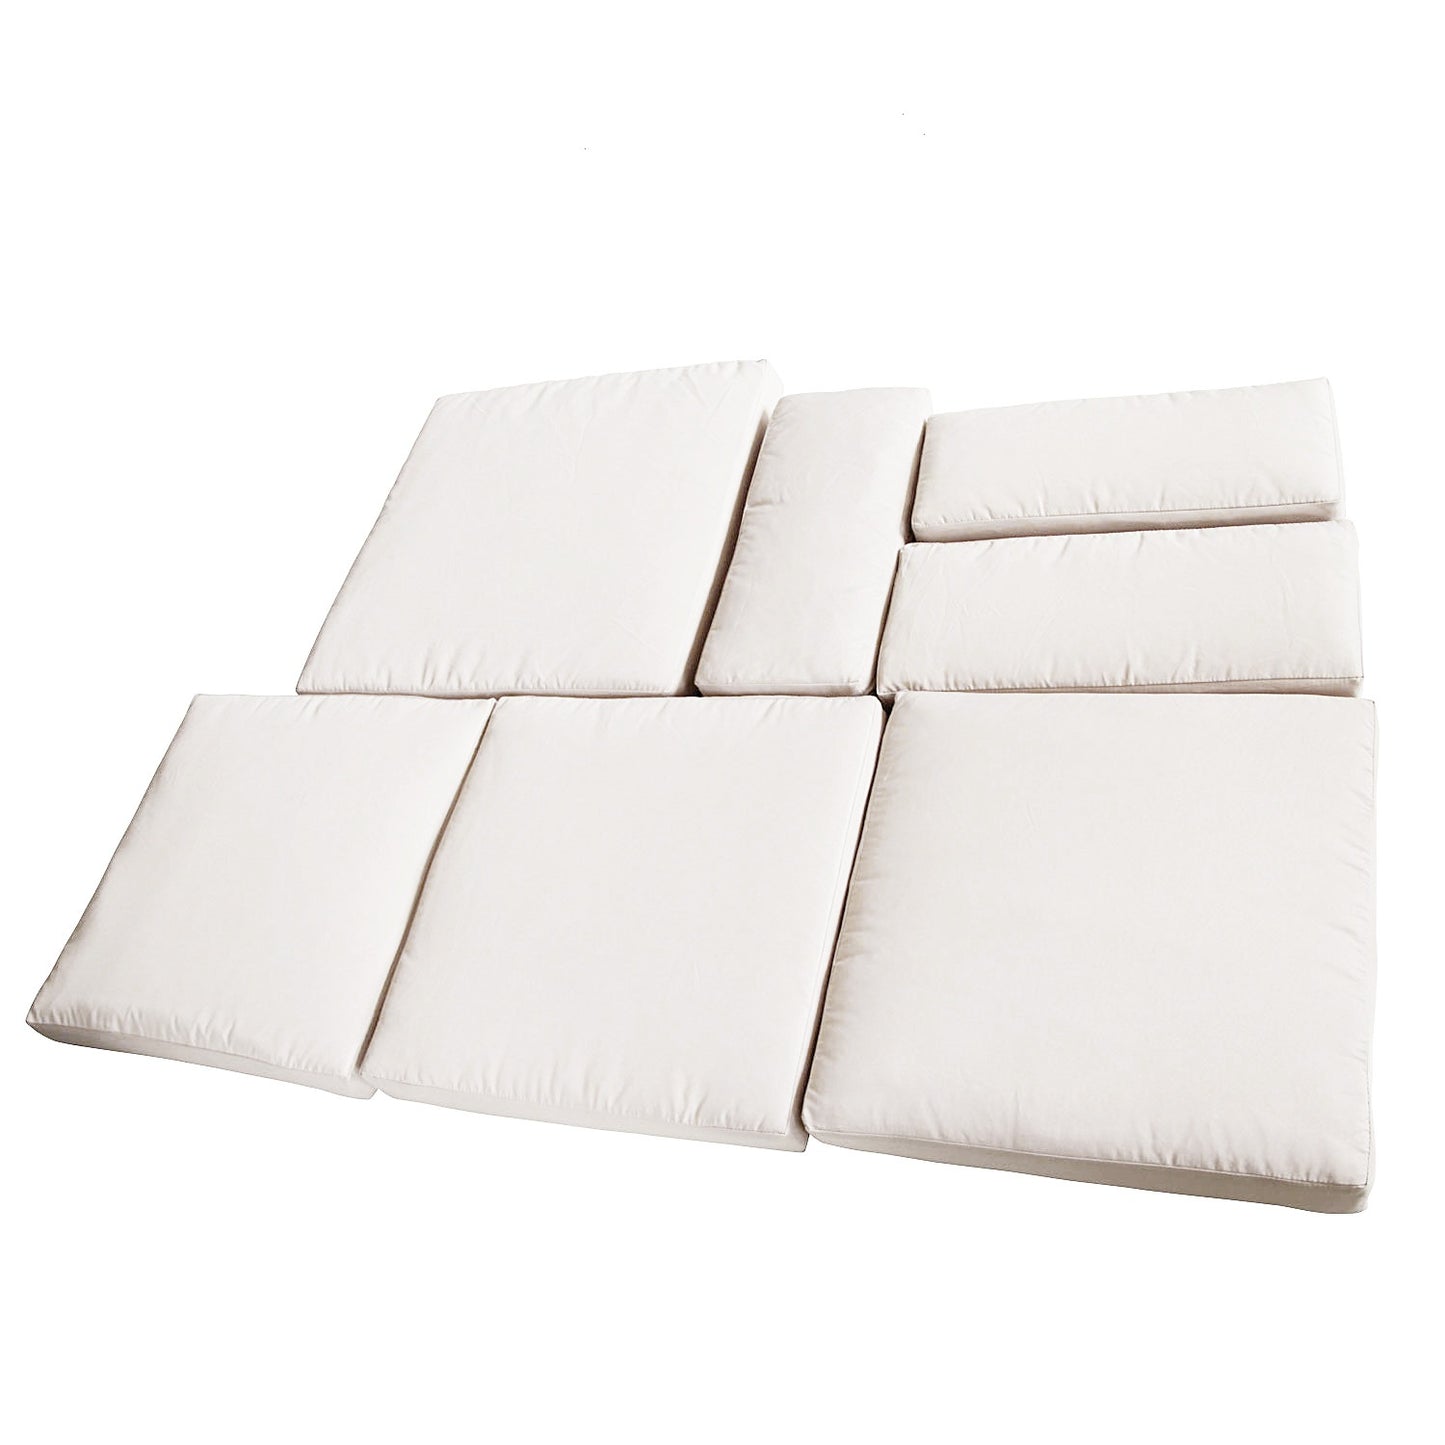 Outsunny Rattan Furniture Cushion Cover Replacement Set, 7 pcs-Cream